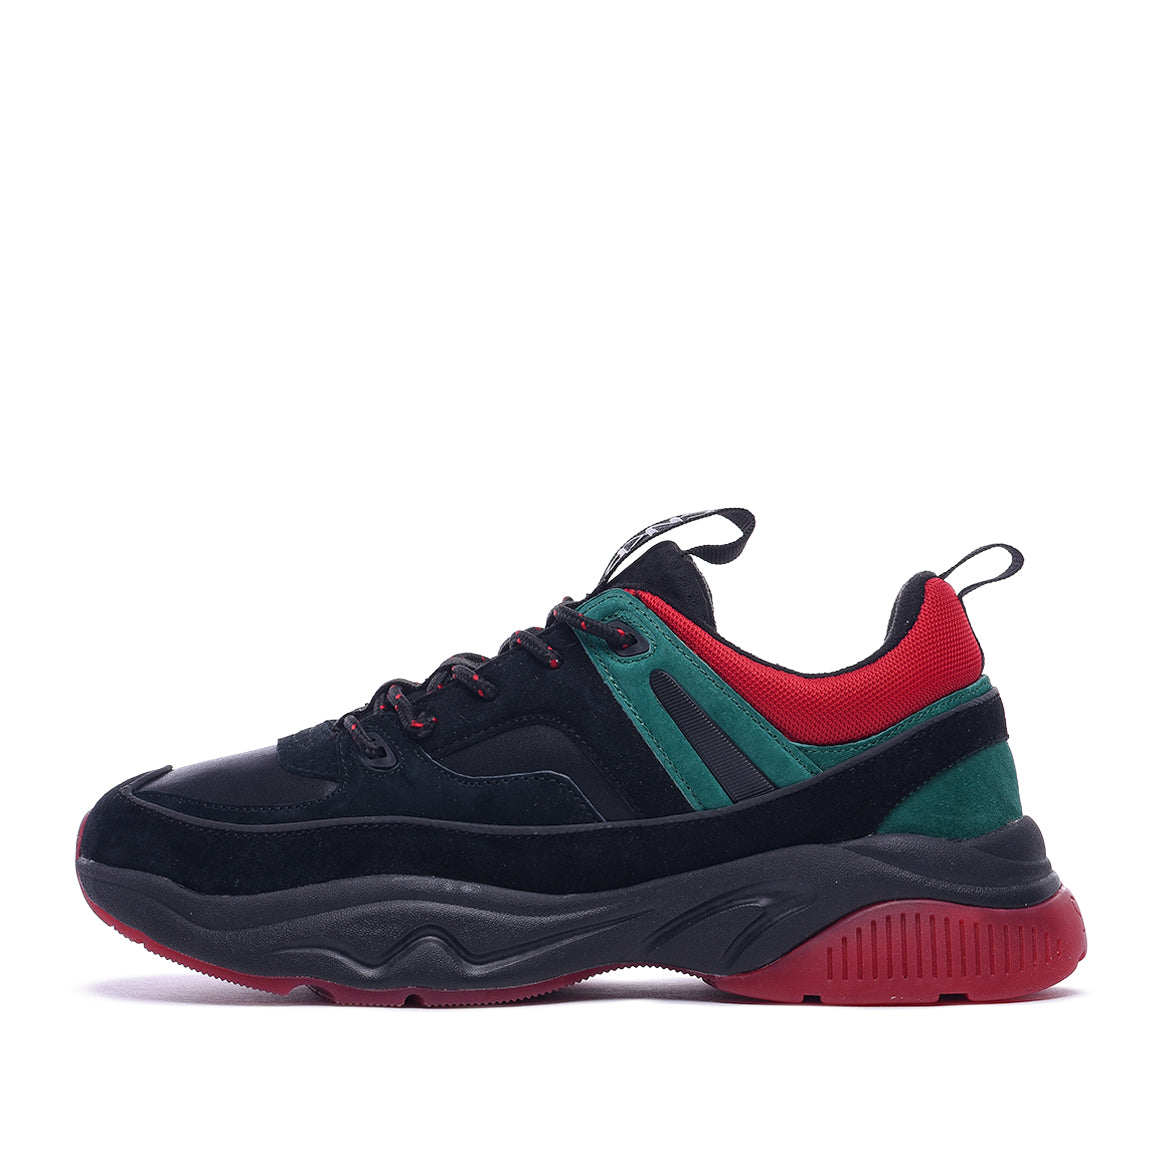 VICTORY - BLACK / RED / GREEN